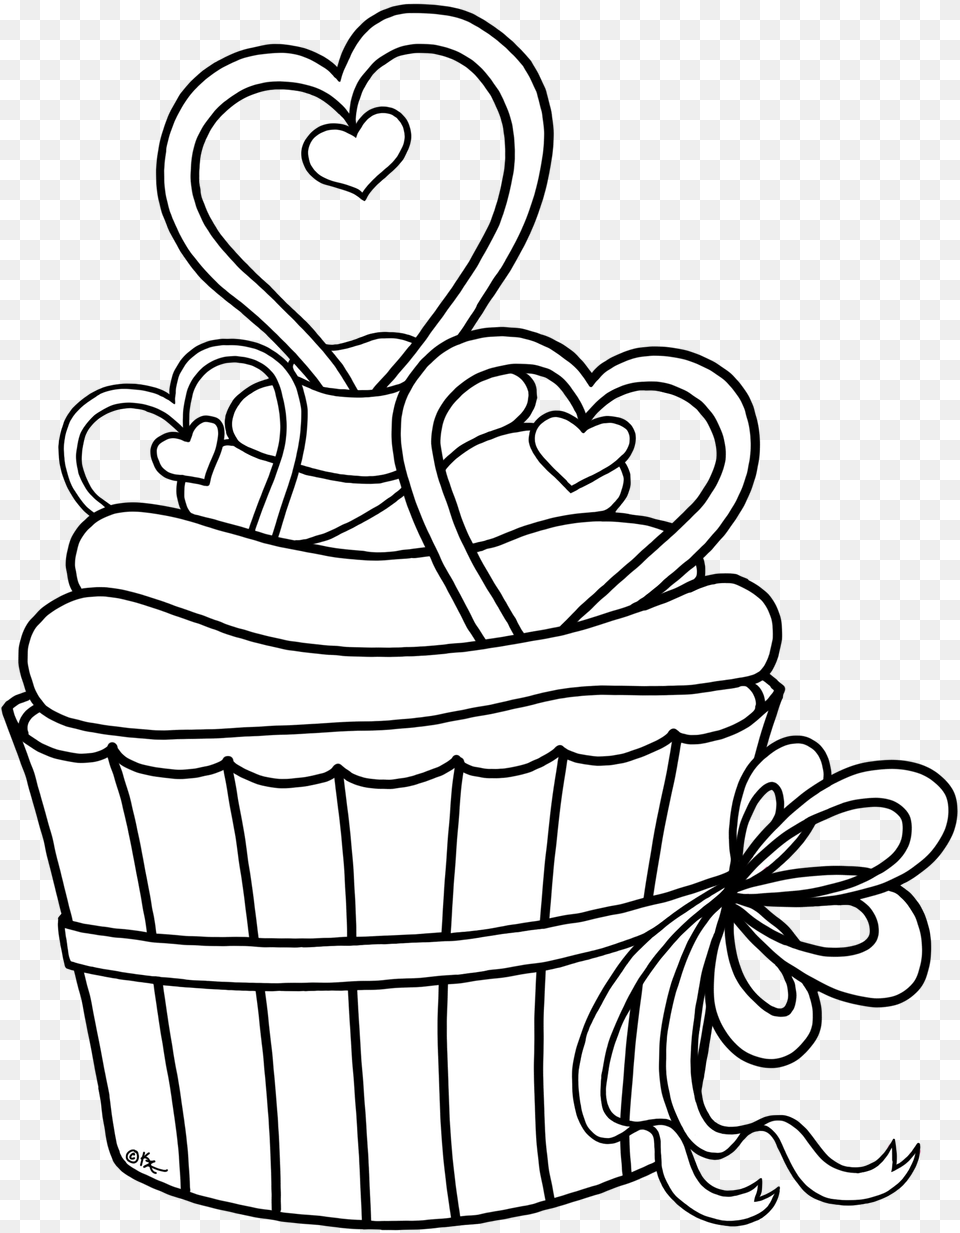 Cupcake Outline Clipart Heart Cupcake Coloring Heart Cupcake Coloring Pages, Cake, Cream, Dessert, Food Free Png